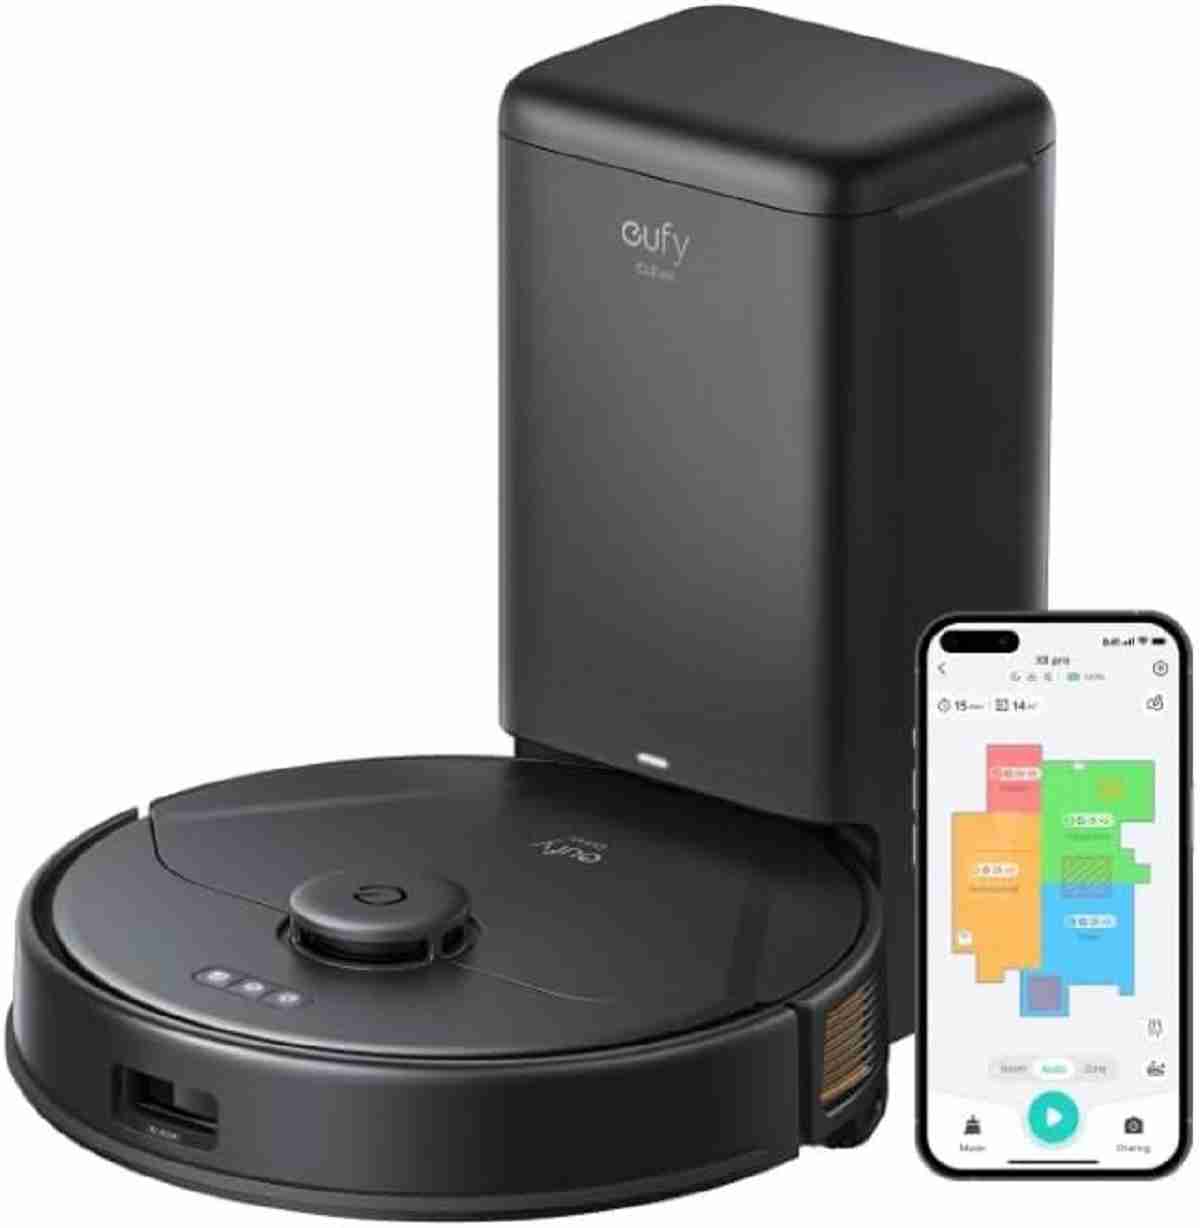 「Anker Eufy Clean X8 Pro with Self-Empty Station」は税込69990円